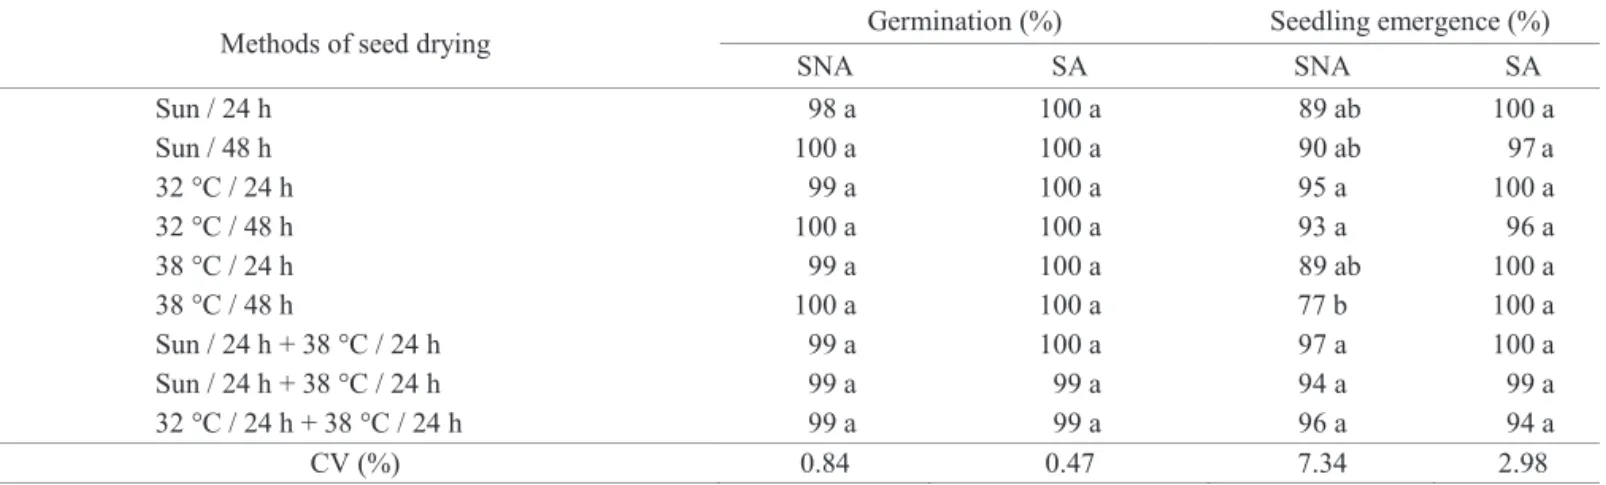 Table 3. Means values of germination and seedling emergence of eggplant seeds submitted to different methods of drying and  stored (SA) or not stored (SNA) for six months.